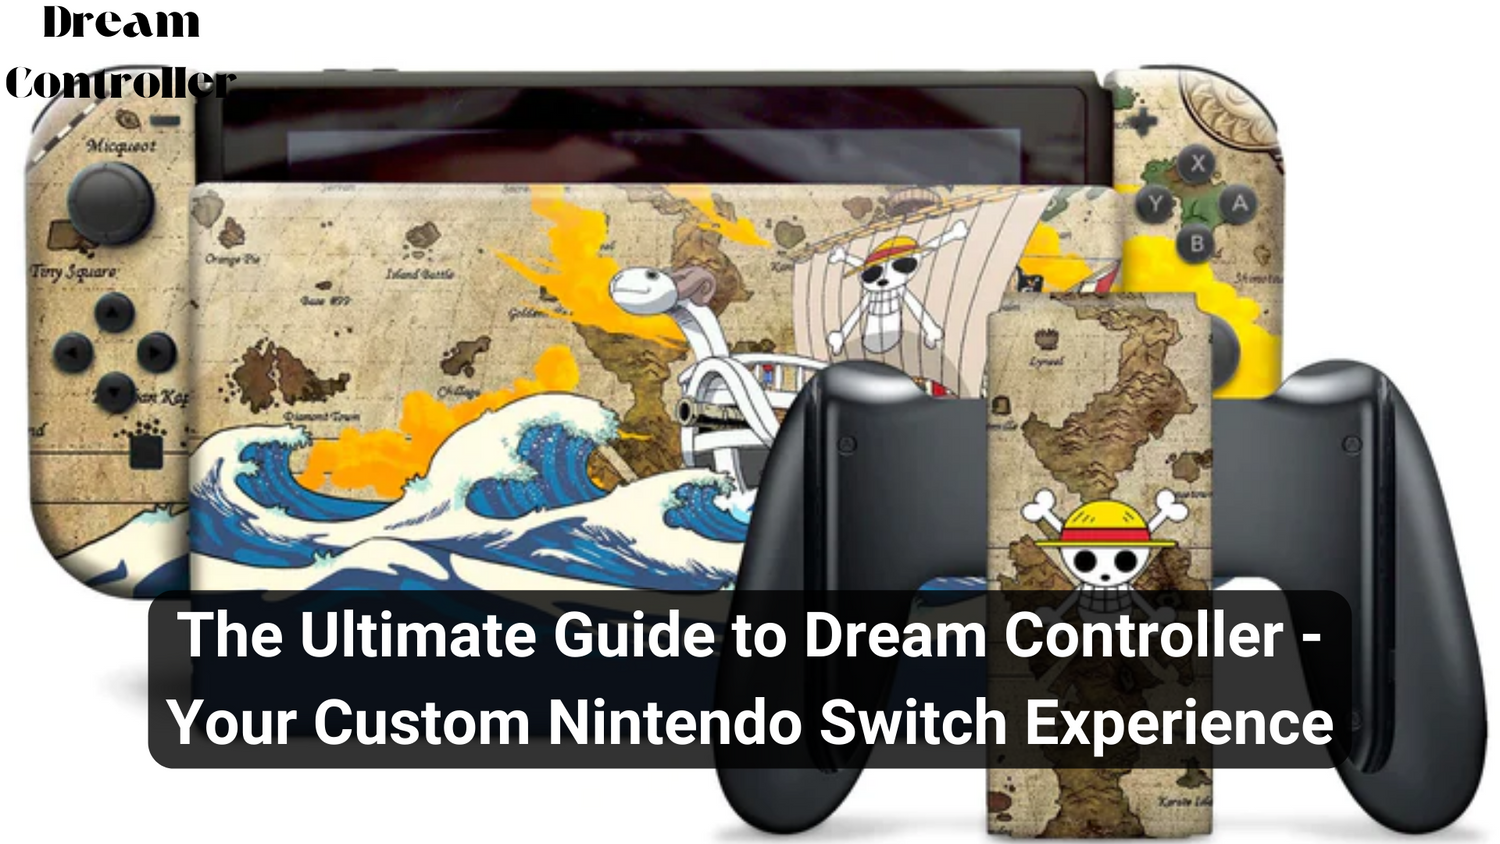 The Ultimate Guide to Dream Controller - Your Custom Nintendo Switch Experience